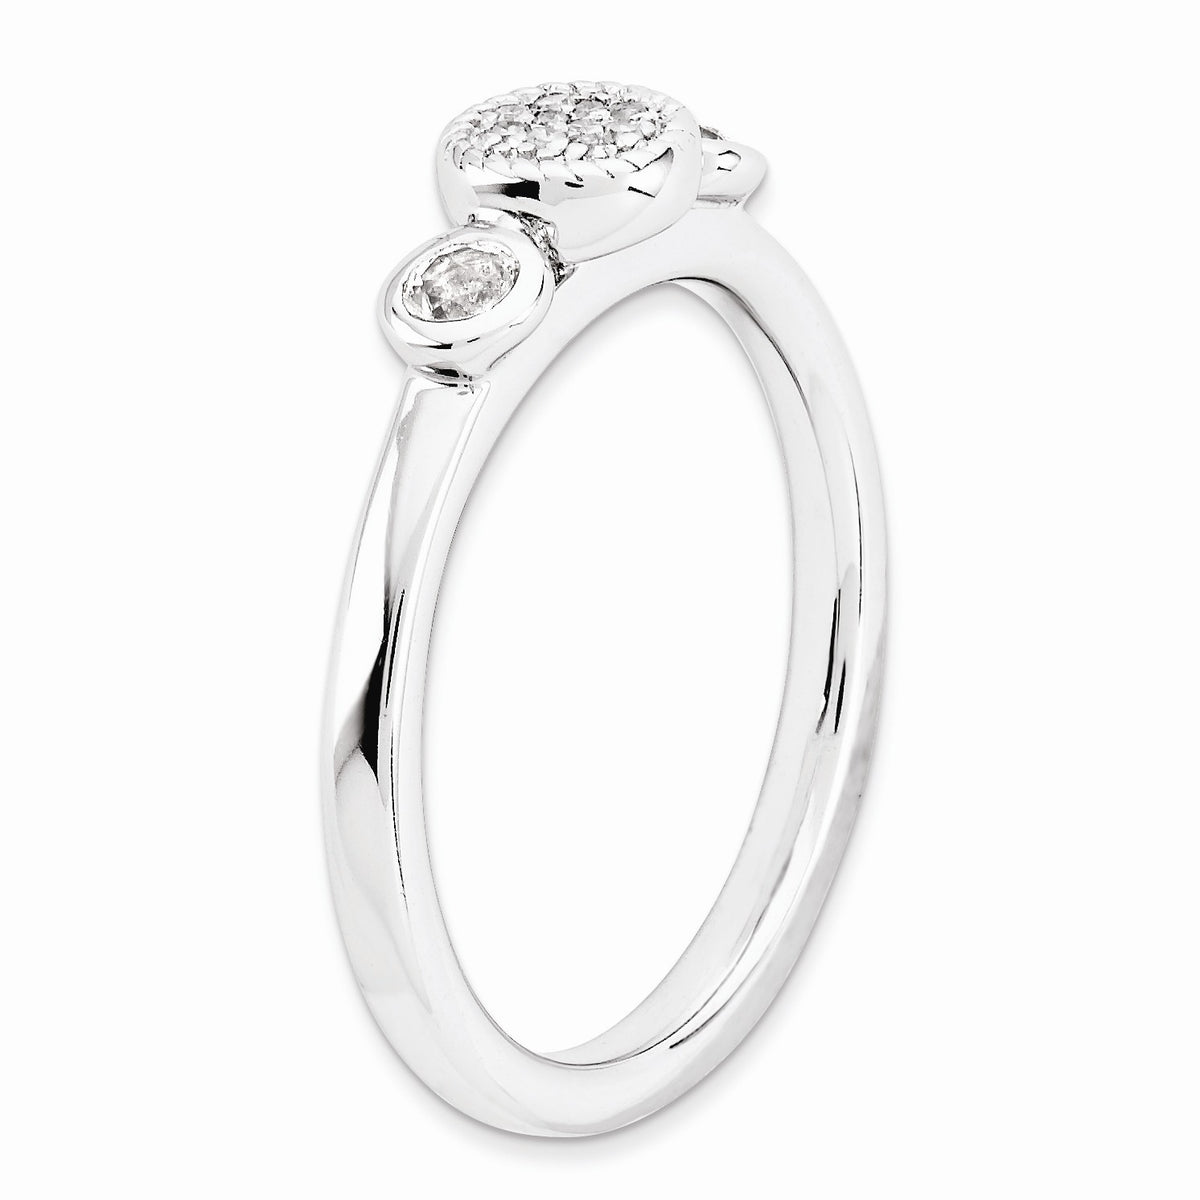 Alternate view of the Sterling Silver Stackable White Topaz and .05 Ctw HI/I3 Diamond Ring by The Black Bow Jewelry Co.